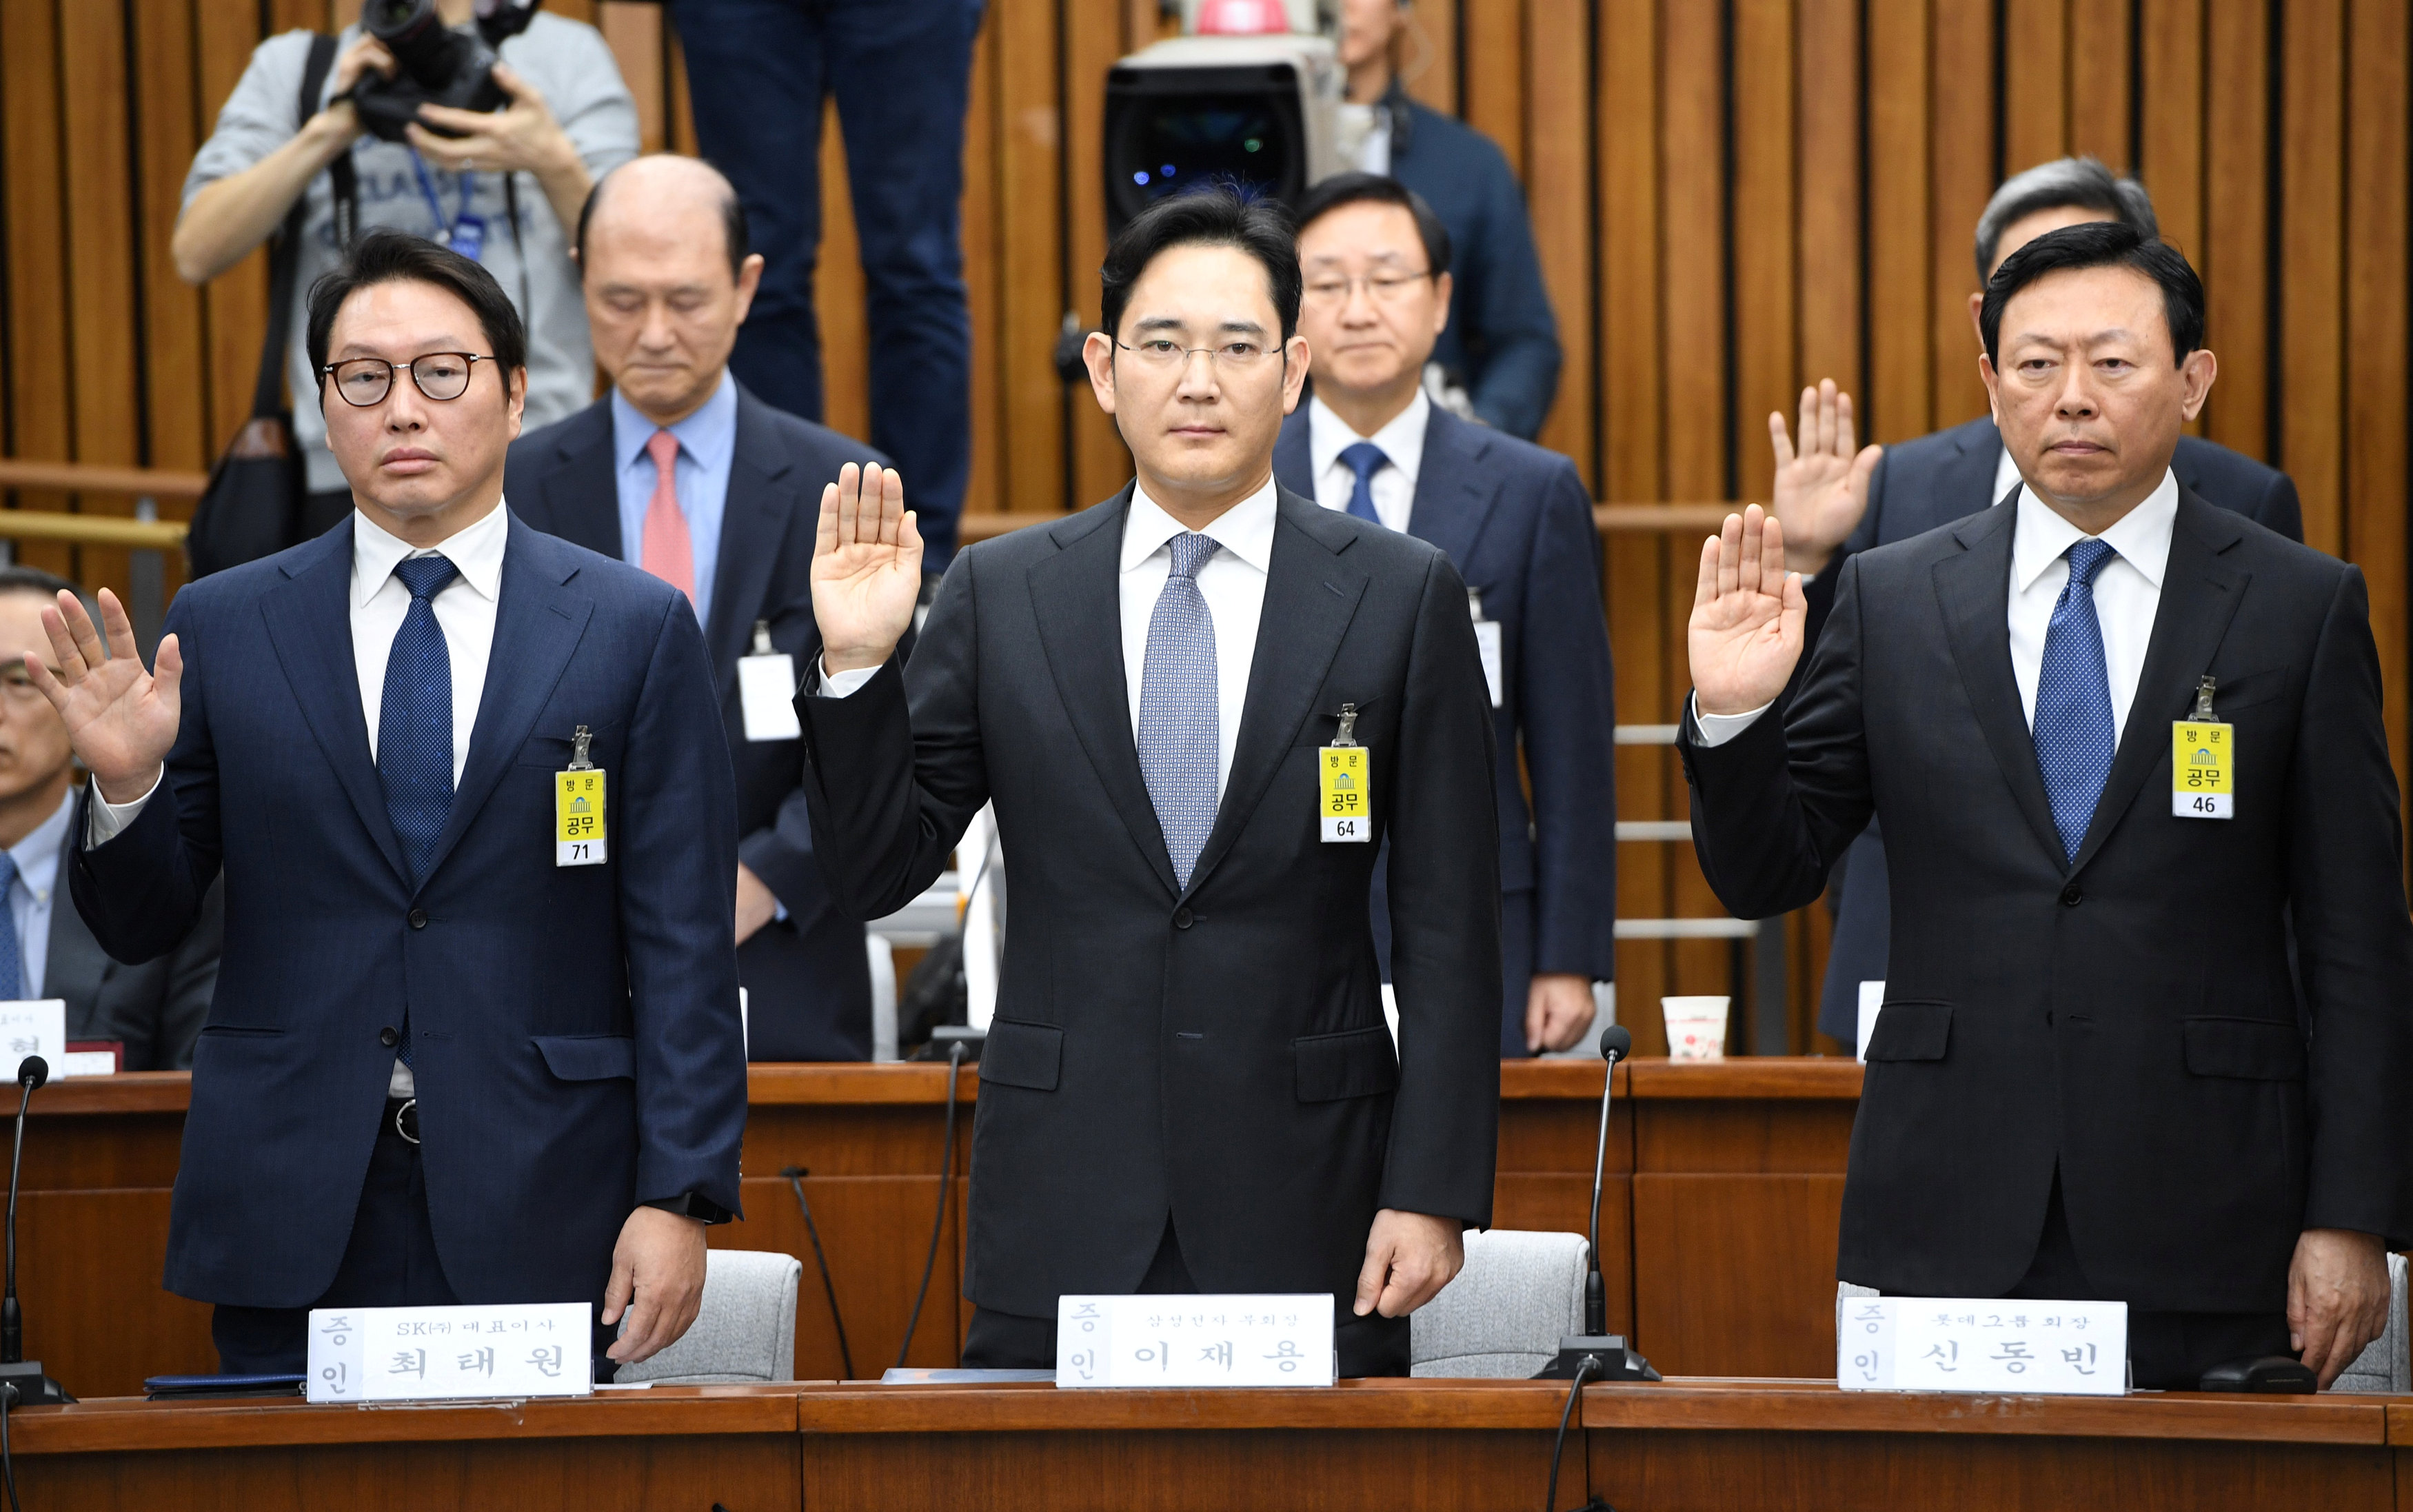 (L-R) SK Group chairman Chey Tae-Won, Samsung Group's heir-apparent Lee Jae-yong and Lotte Group Chairman Shin Dong-Bin take an oath during a parliamentary probe into a scandal engulfing President Park Geun-Hye at the National Assembly in Seoul on Decembe